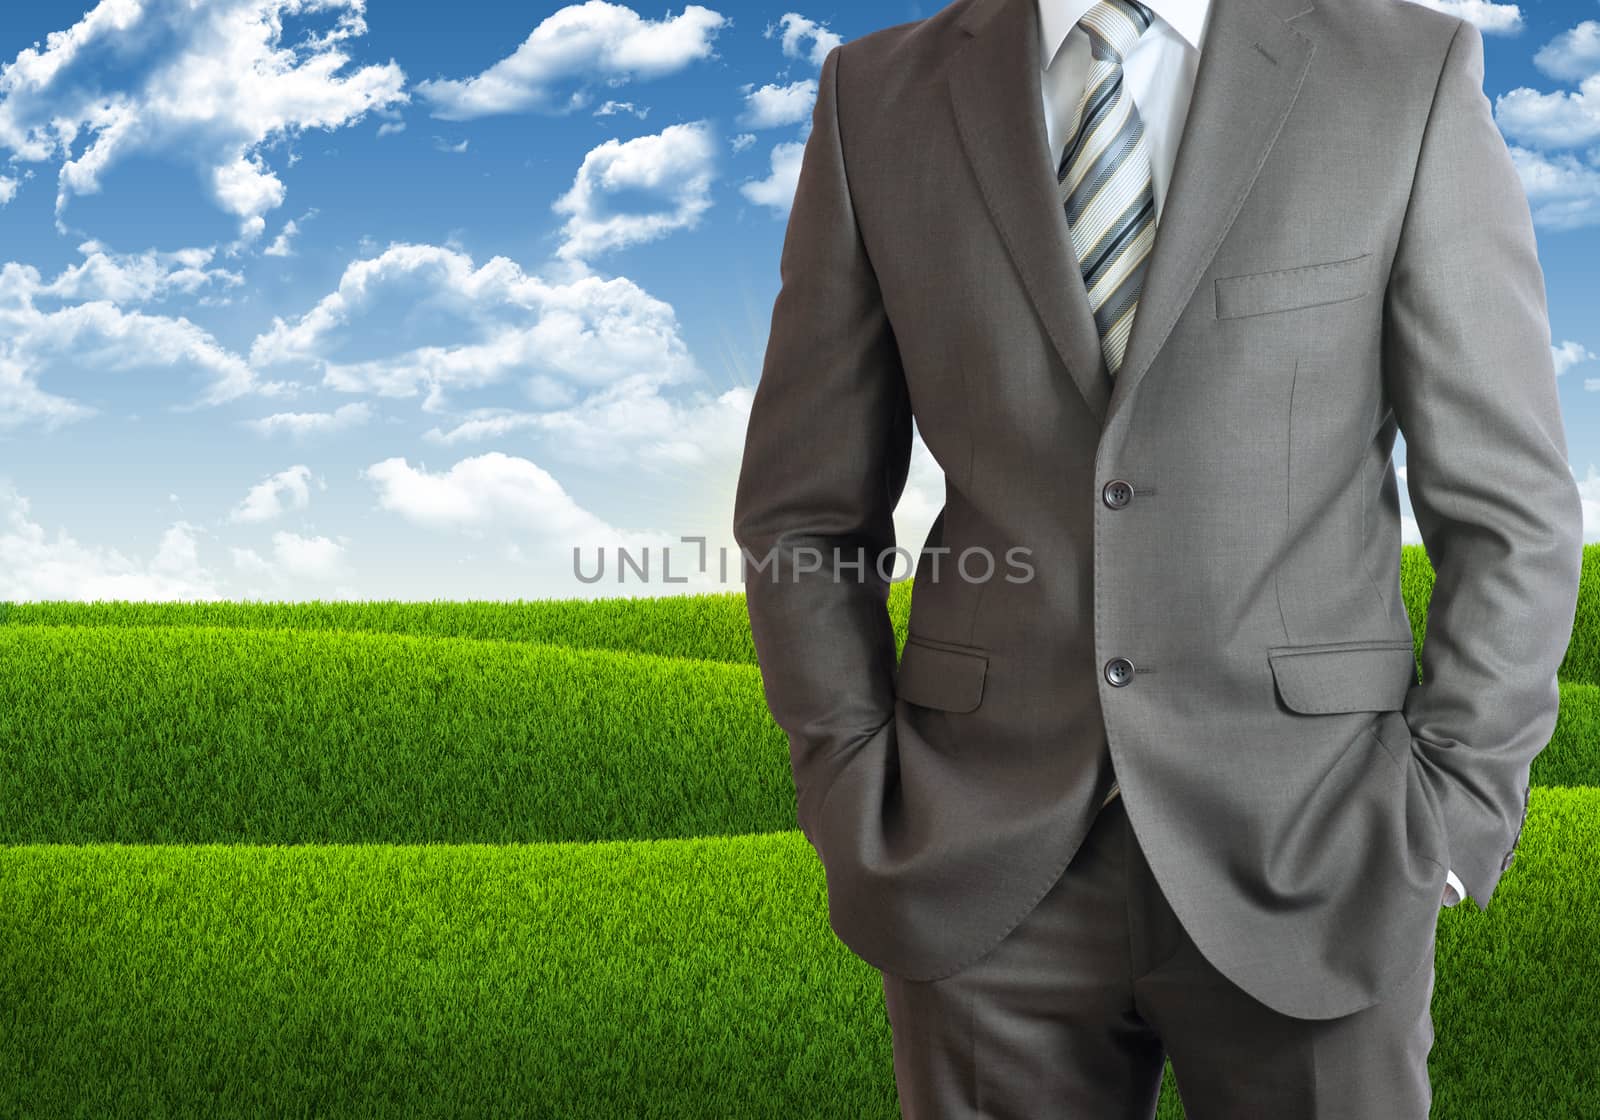 Businessman standing with hands in pockets. Blue sky and green grass as backdrop